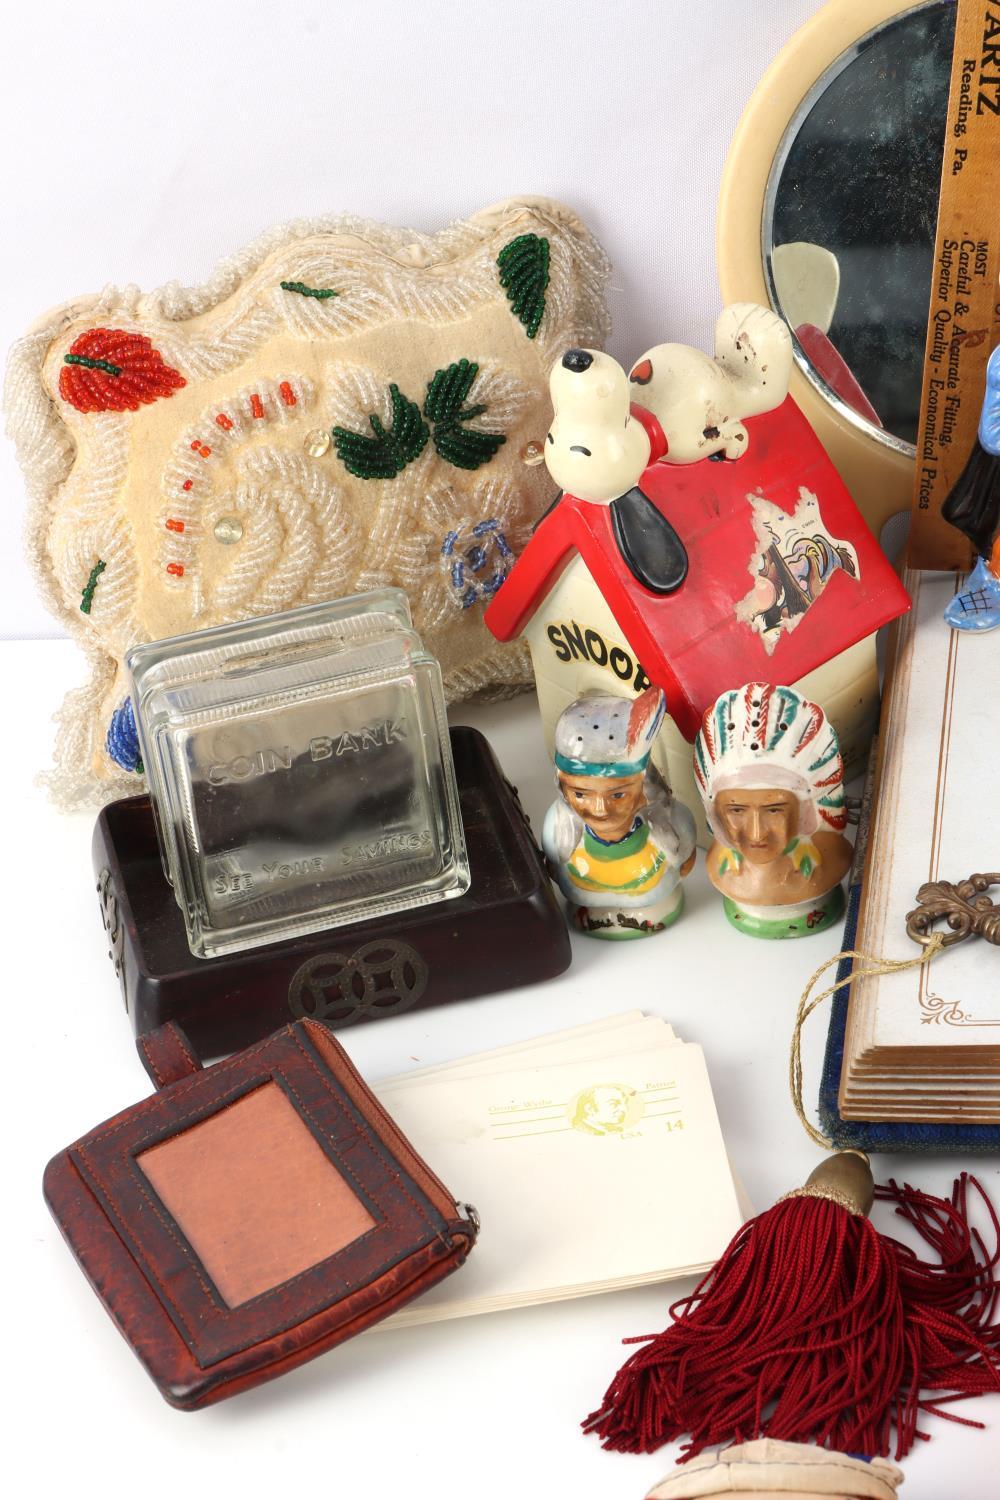 ANTIQUES AND GENERAL VINTAGE COLLECTOR ITEMS